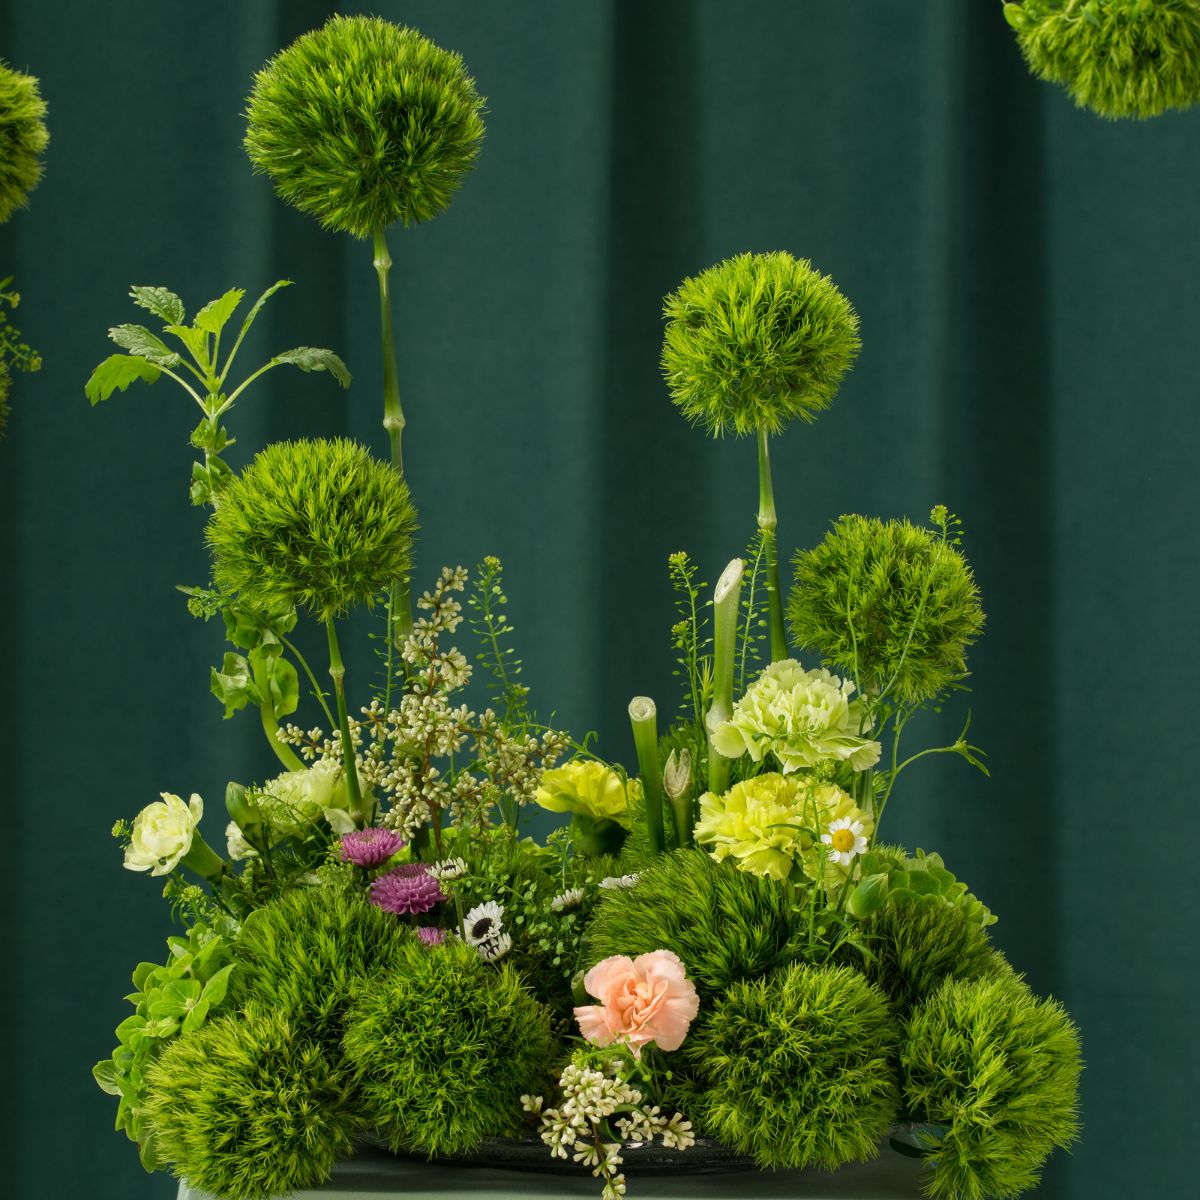 dianthus-barbatus-kiwi-mellow-cool-the-greenest-and-boldest-addition-you-didnt-know-you-needed-featured